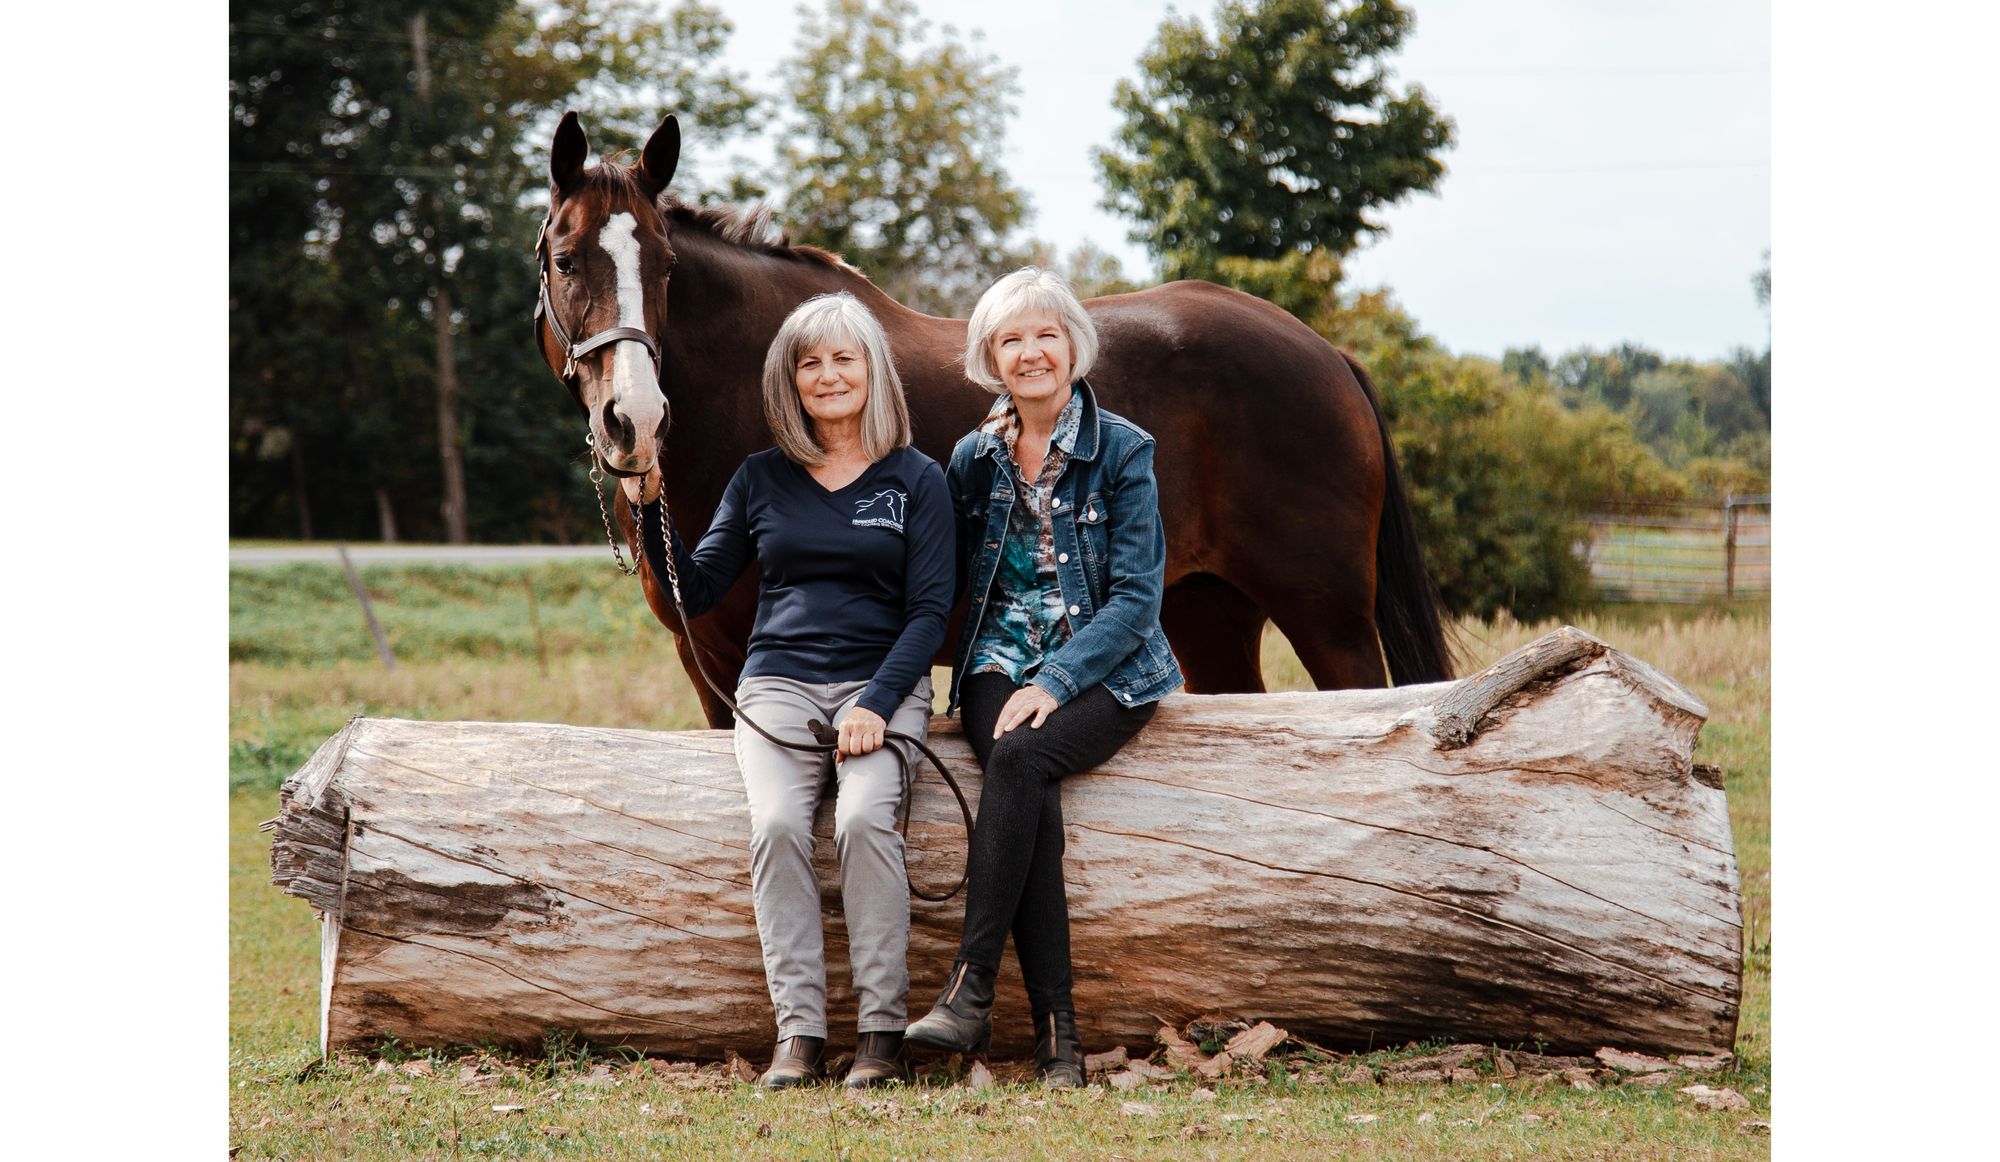 Corporate and Life Coaching With Horses - Unbridled Coaching